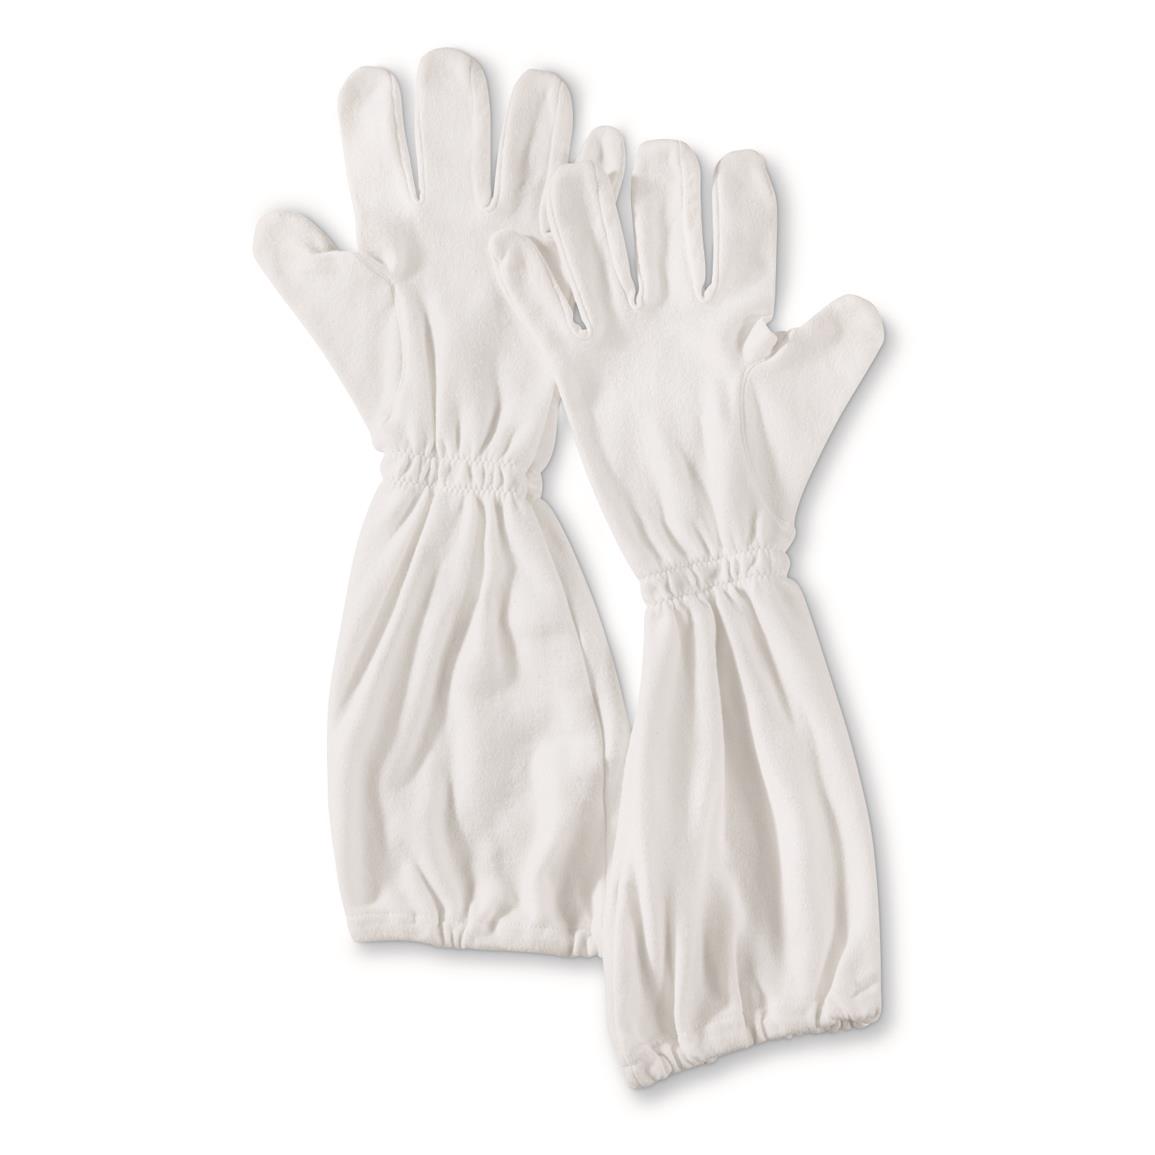 German Military Surplus Fire-resistant Gloves, 2 Pairs, Like New, White